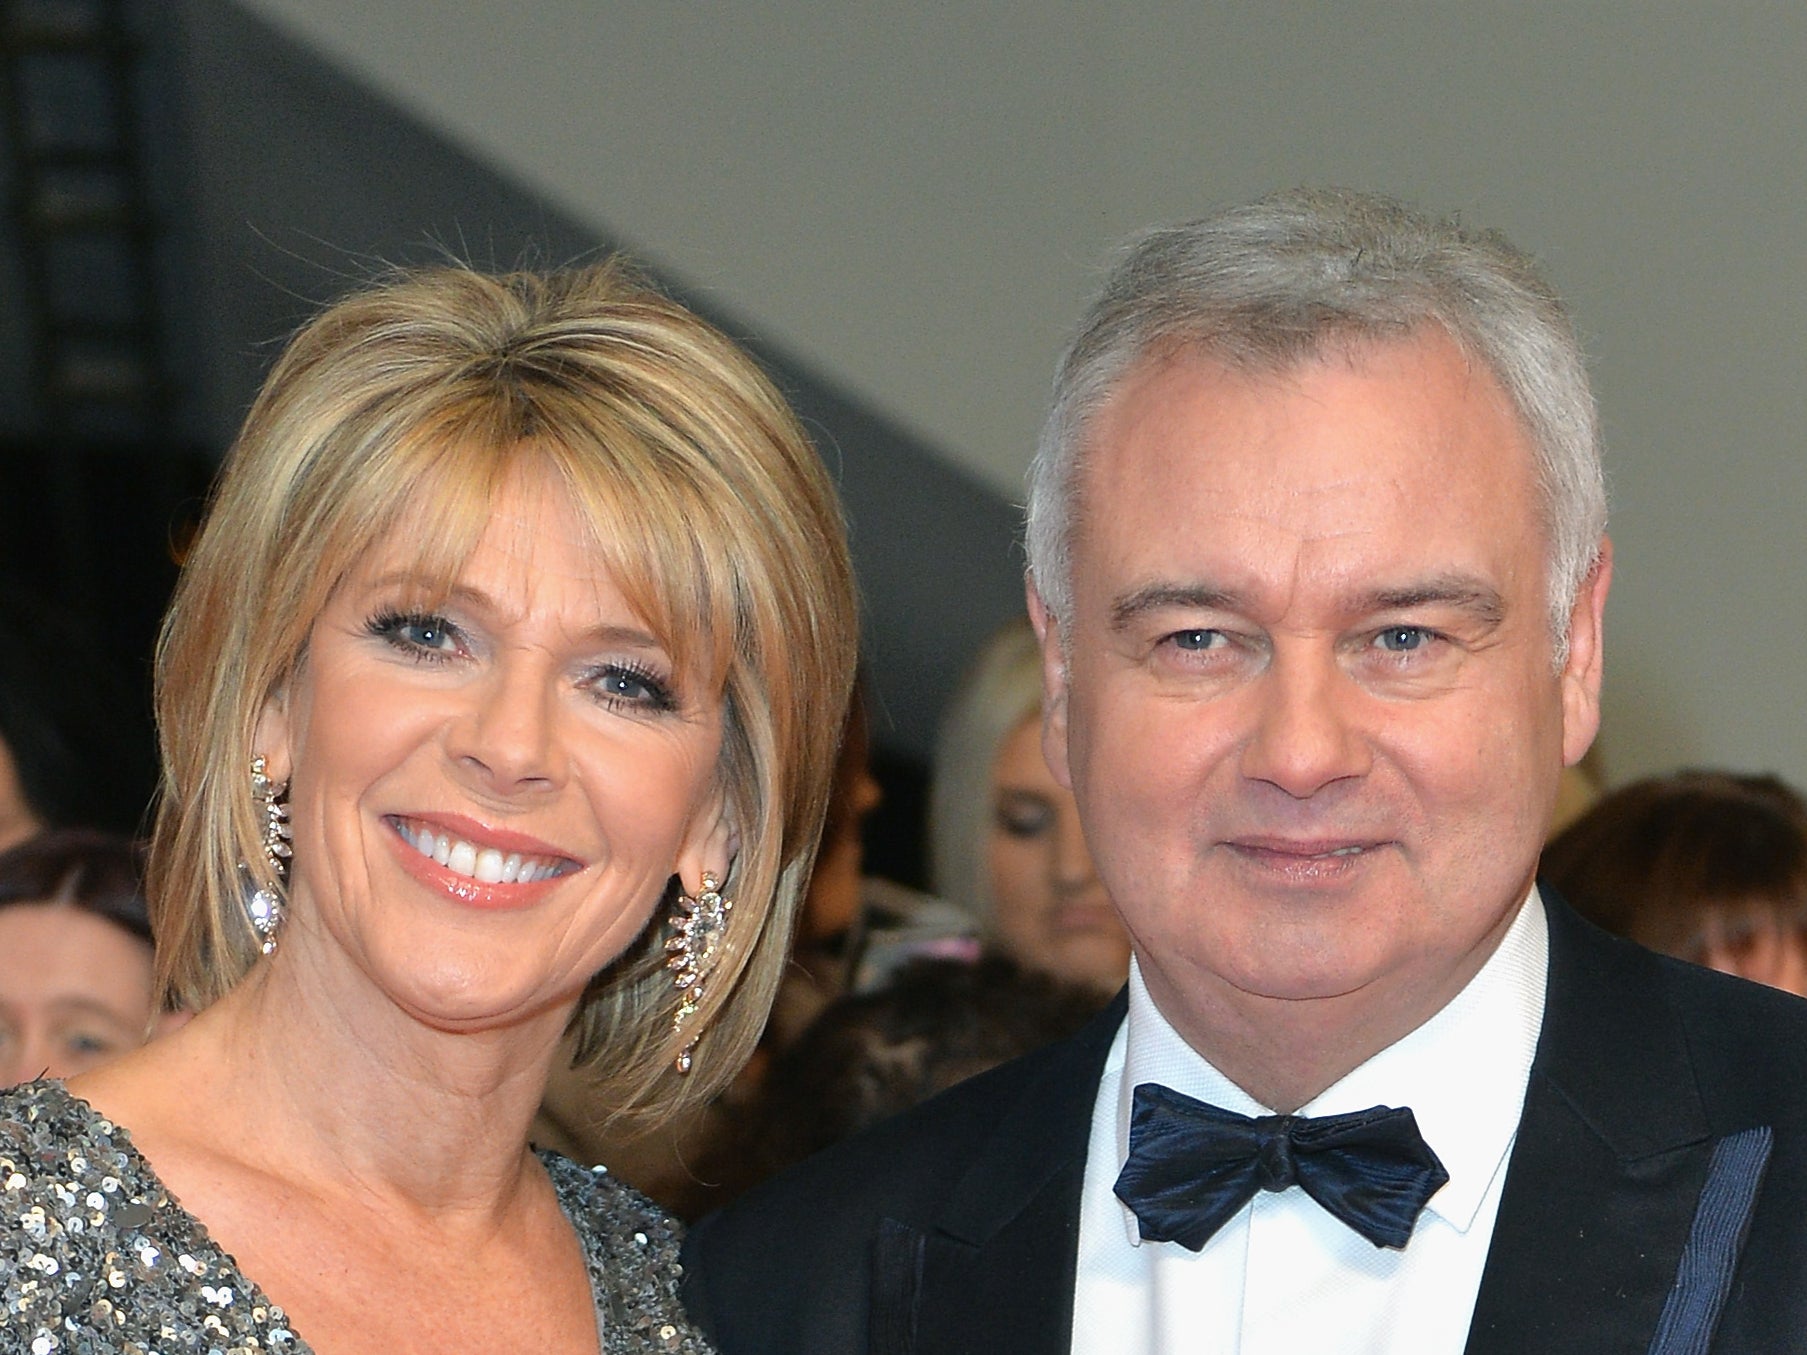 The pair have been a power couple of daytime television, presenting ITV’s lifestyle show This Morning for 15 years from 2006 to 2021